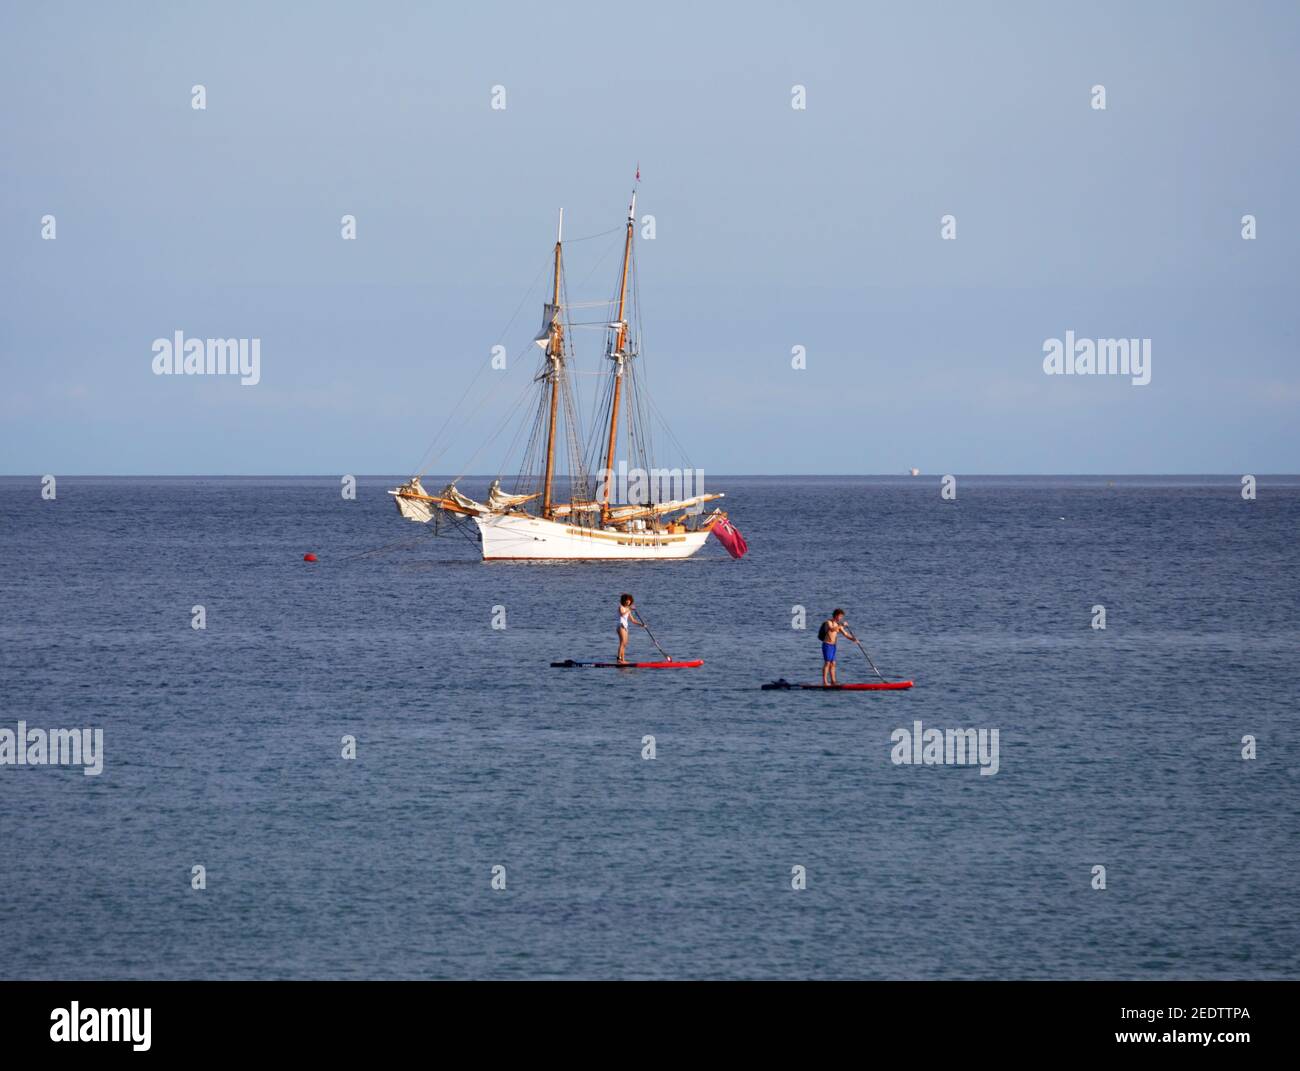 Topsail schooner Anny moored off Charlestown harbour, St Austell, Cornwall. Stock Photo